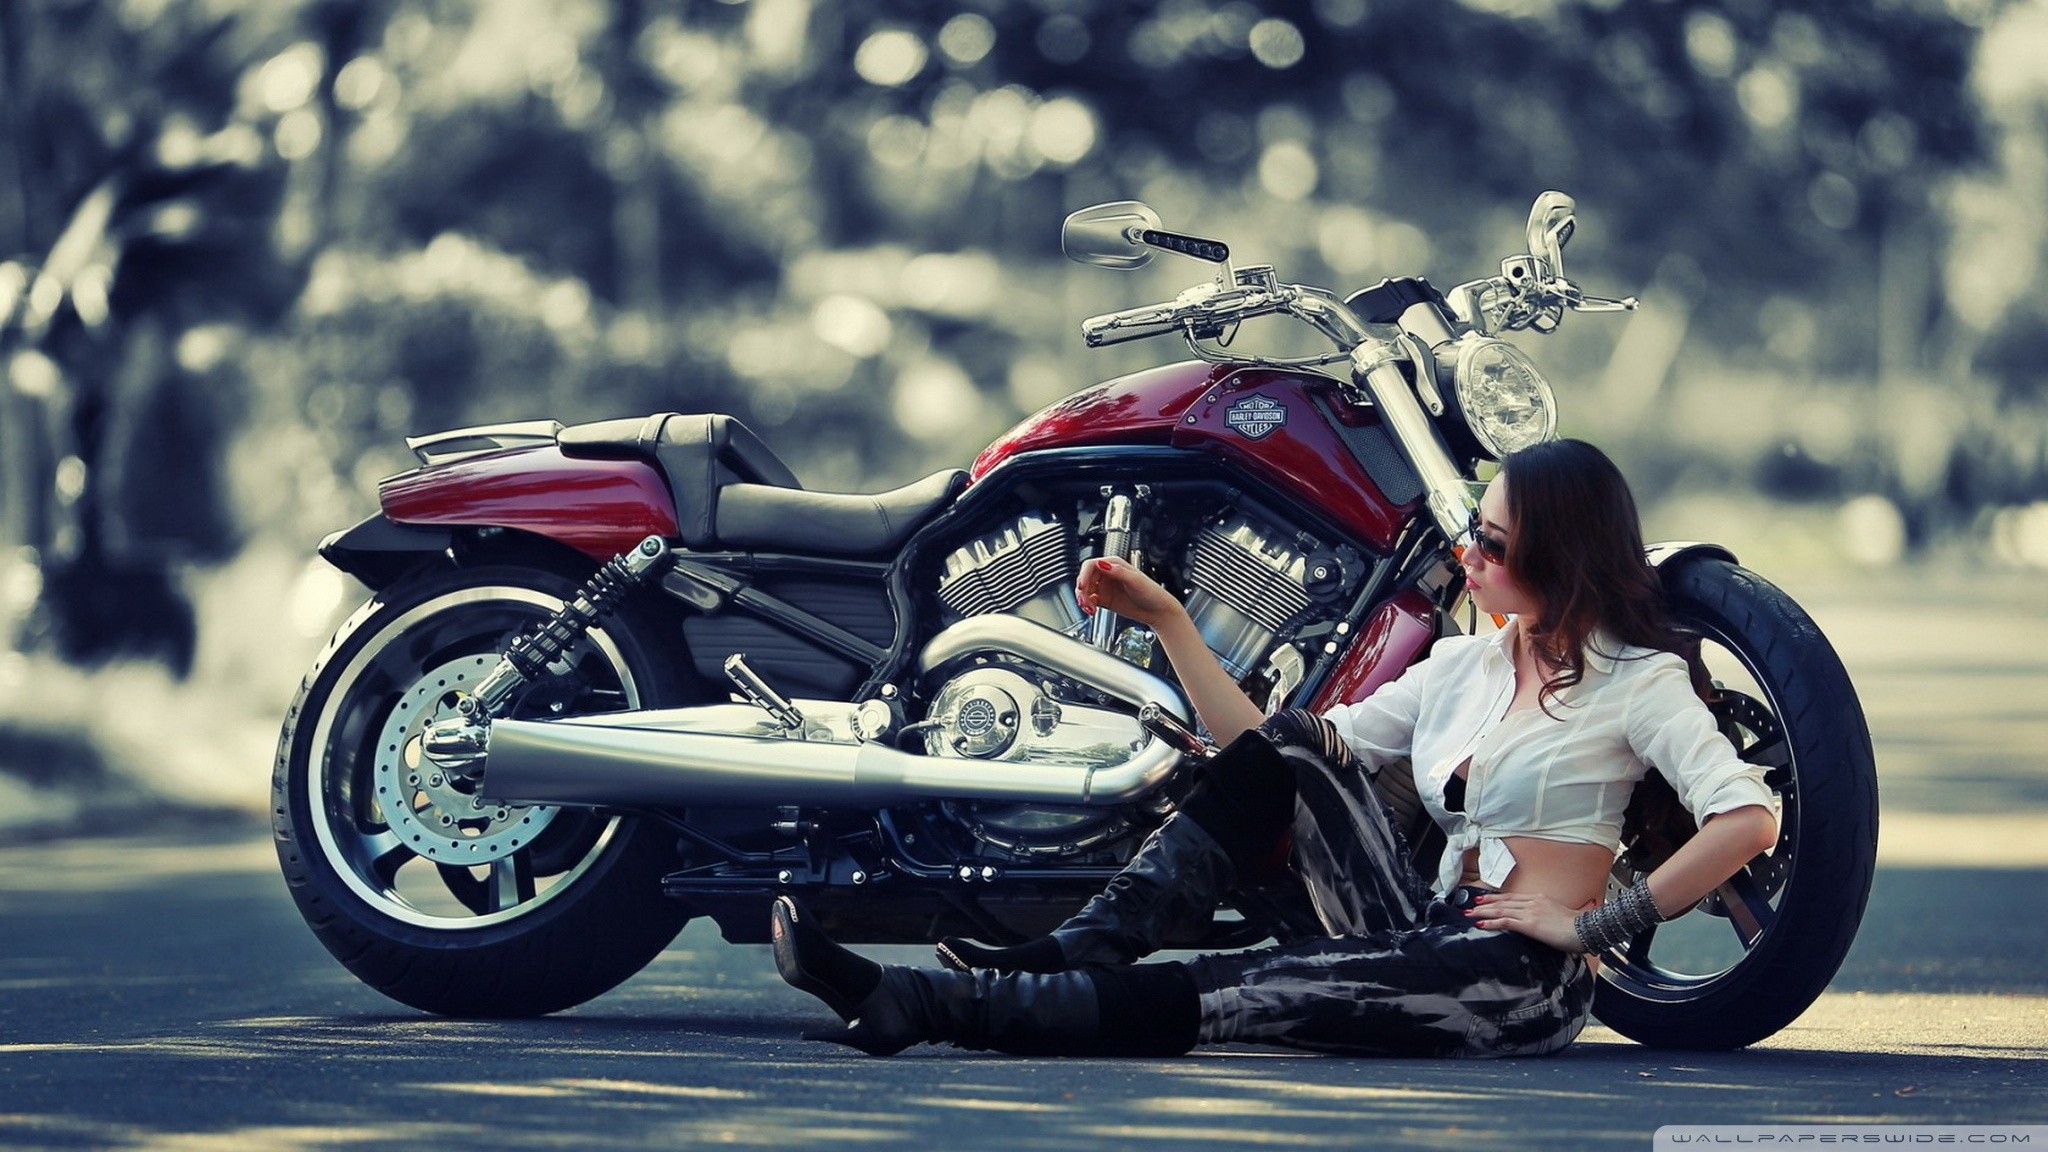 170+ Girls & Motorcycles HD Wallpapers and Backgrounds